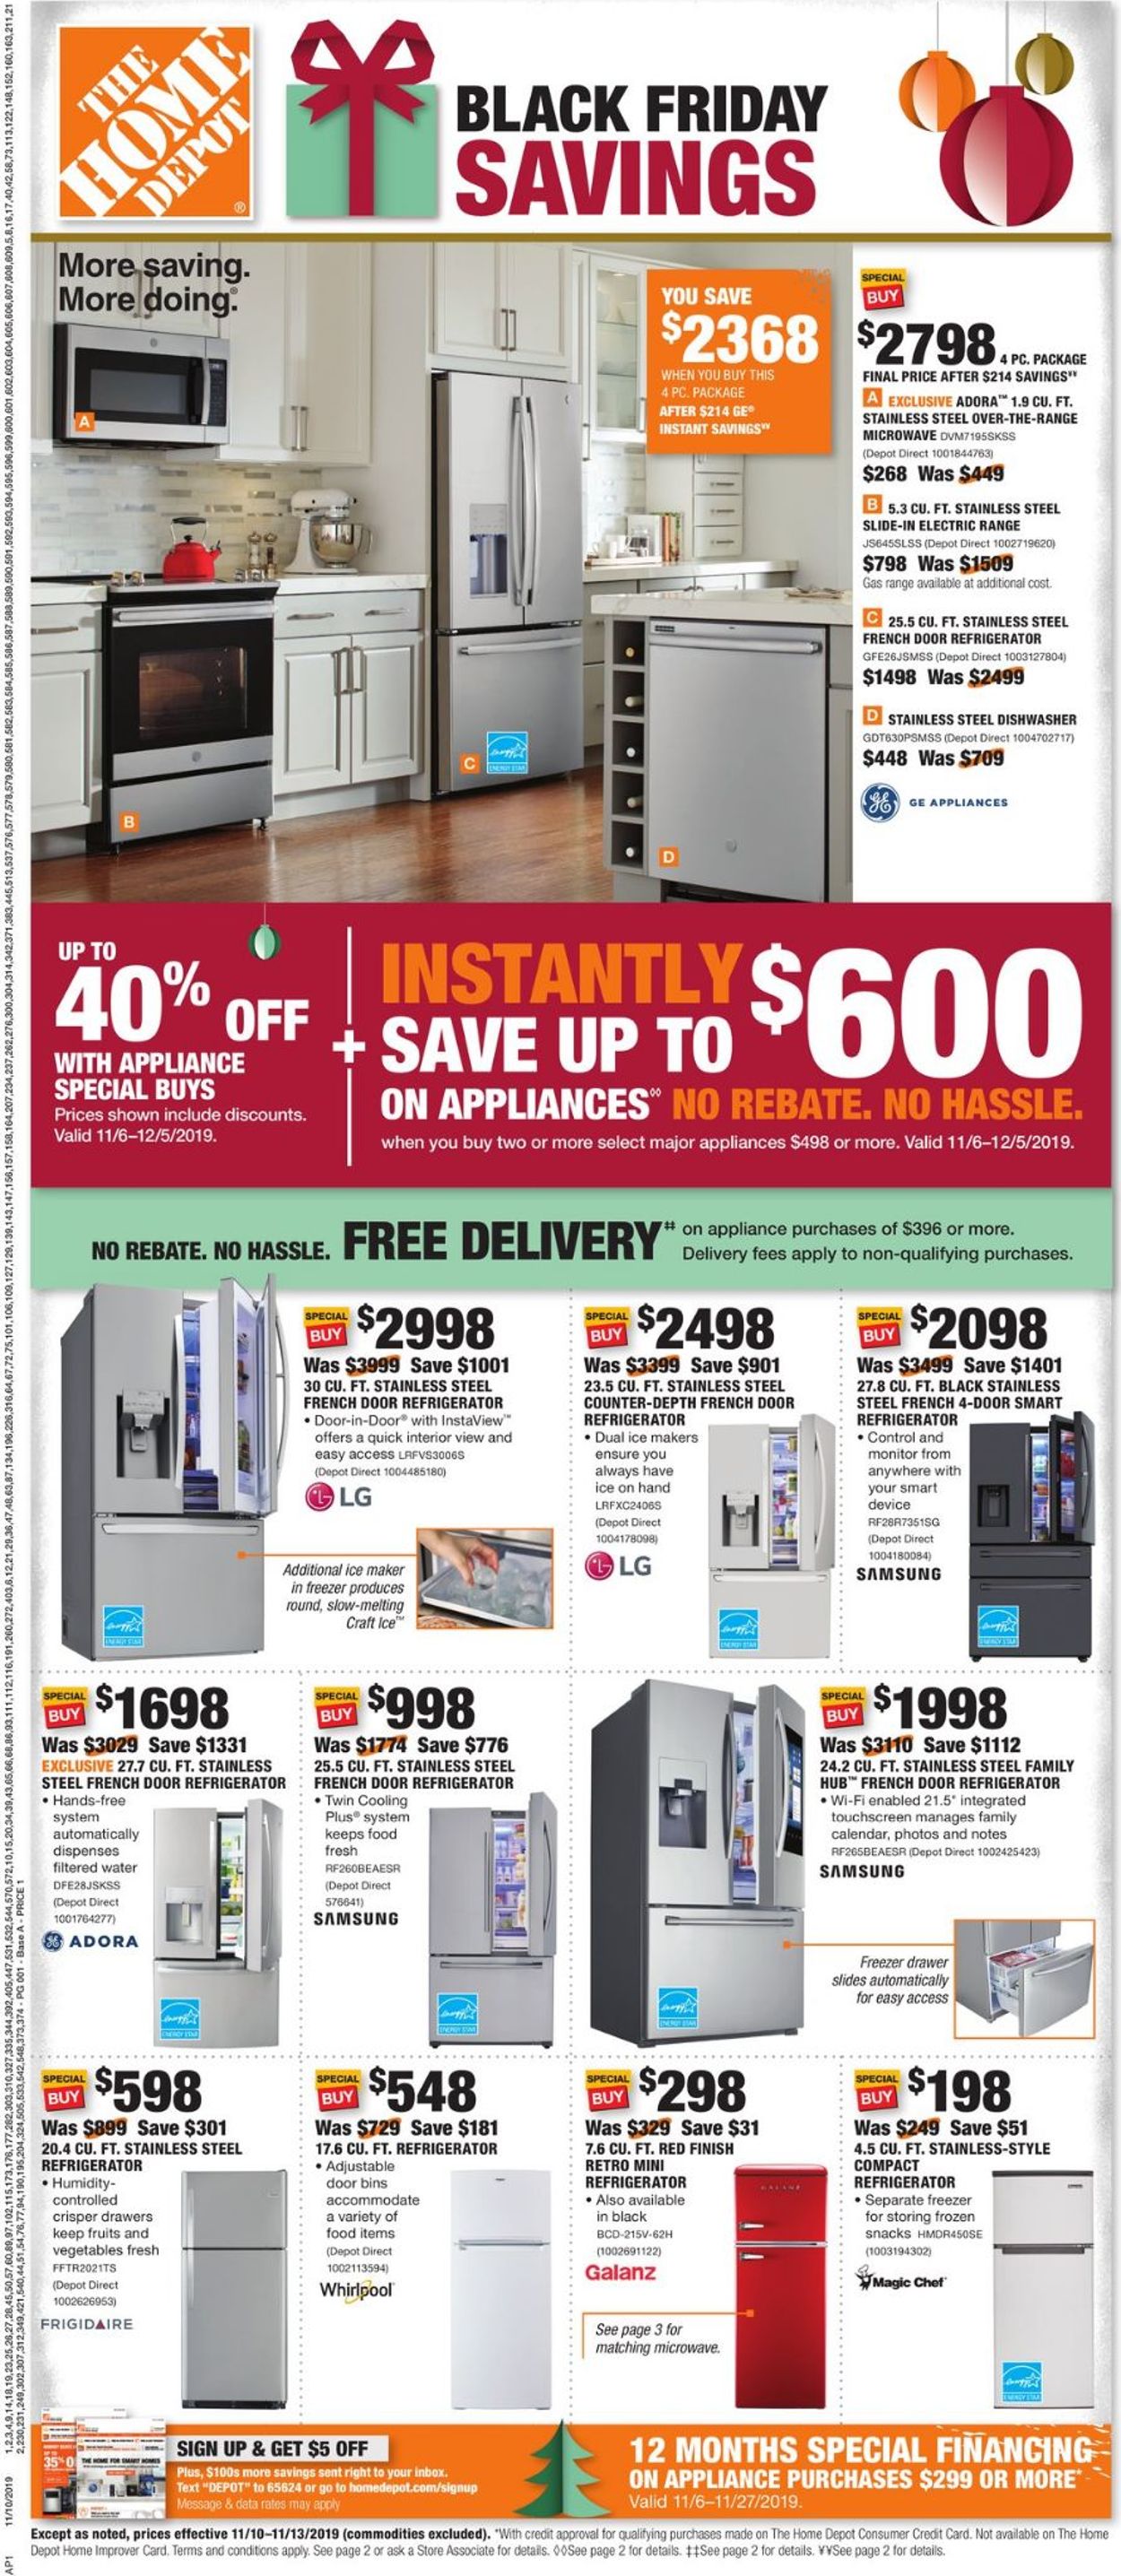 Home Depot - Black Friday Ad 2019 Current weekly ad 11/10 - 11/13/2019 - www.bagsaleusa.com